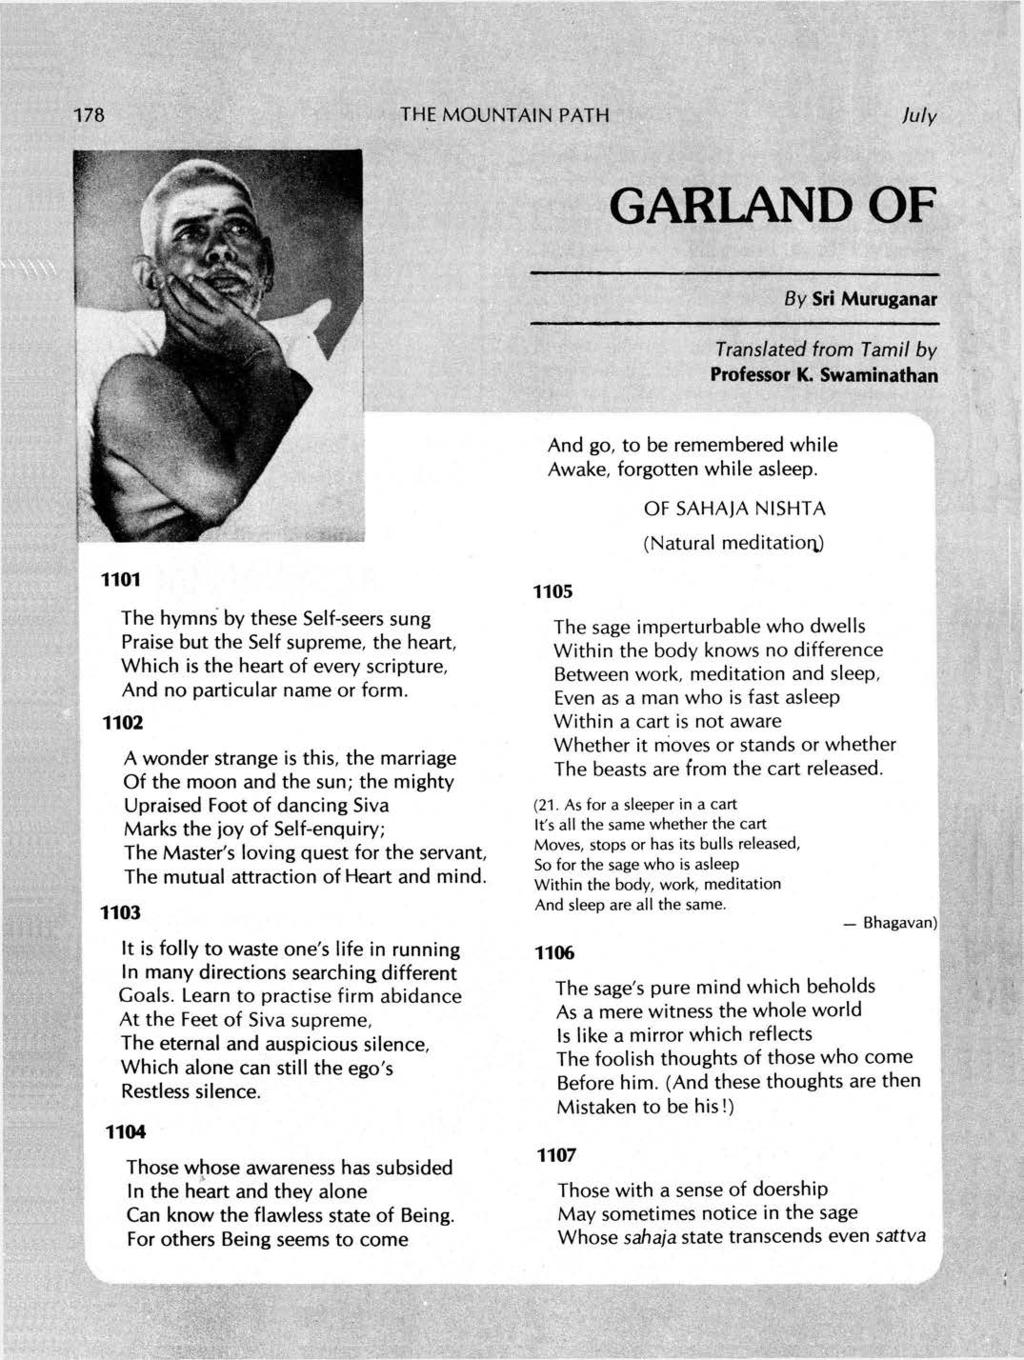 178 THE MOUNTAIN PATH GARLAND OF By Sri Muruganar Translated from Tamil by Professor K. Swaminathan And go, to be remembered while Awake, forgotten while asleep.